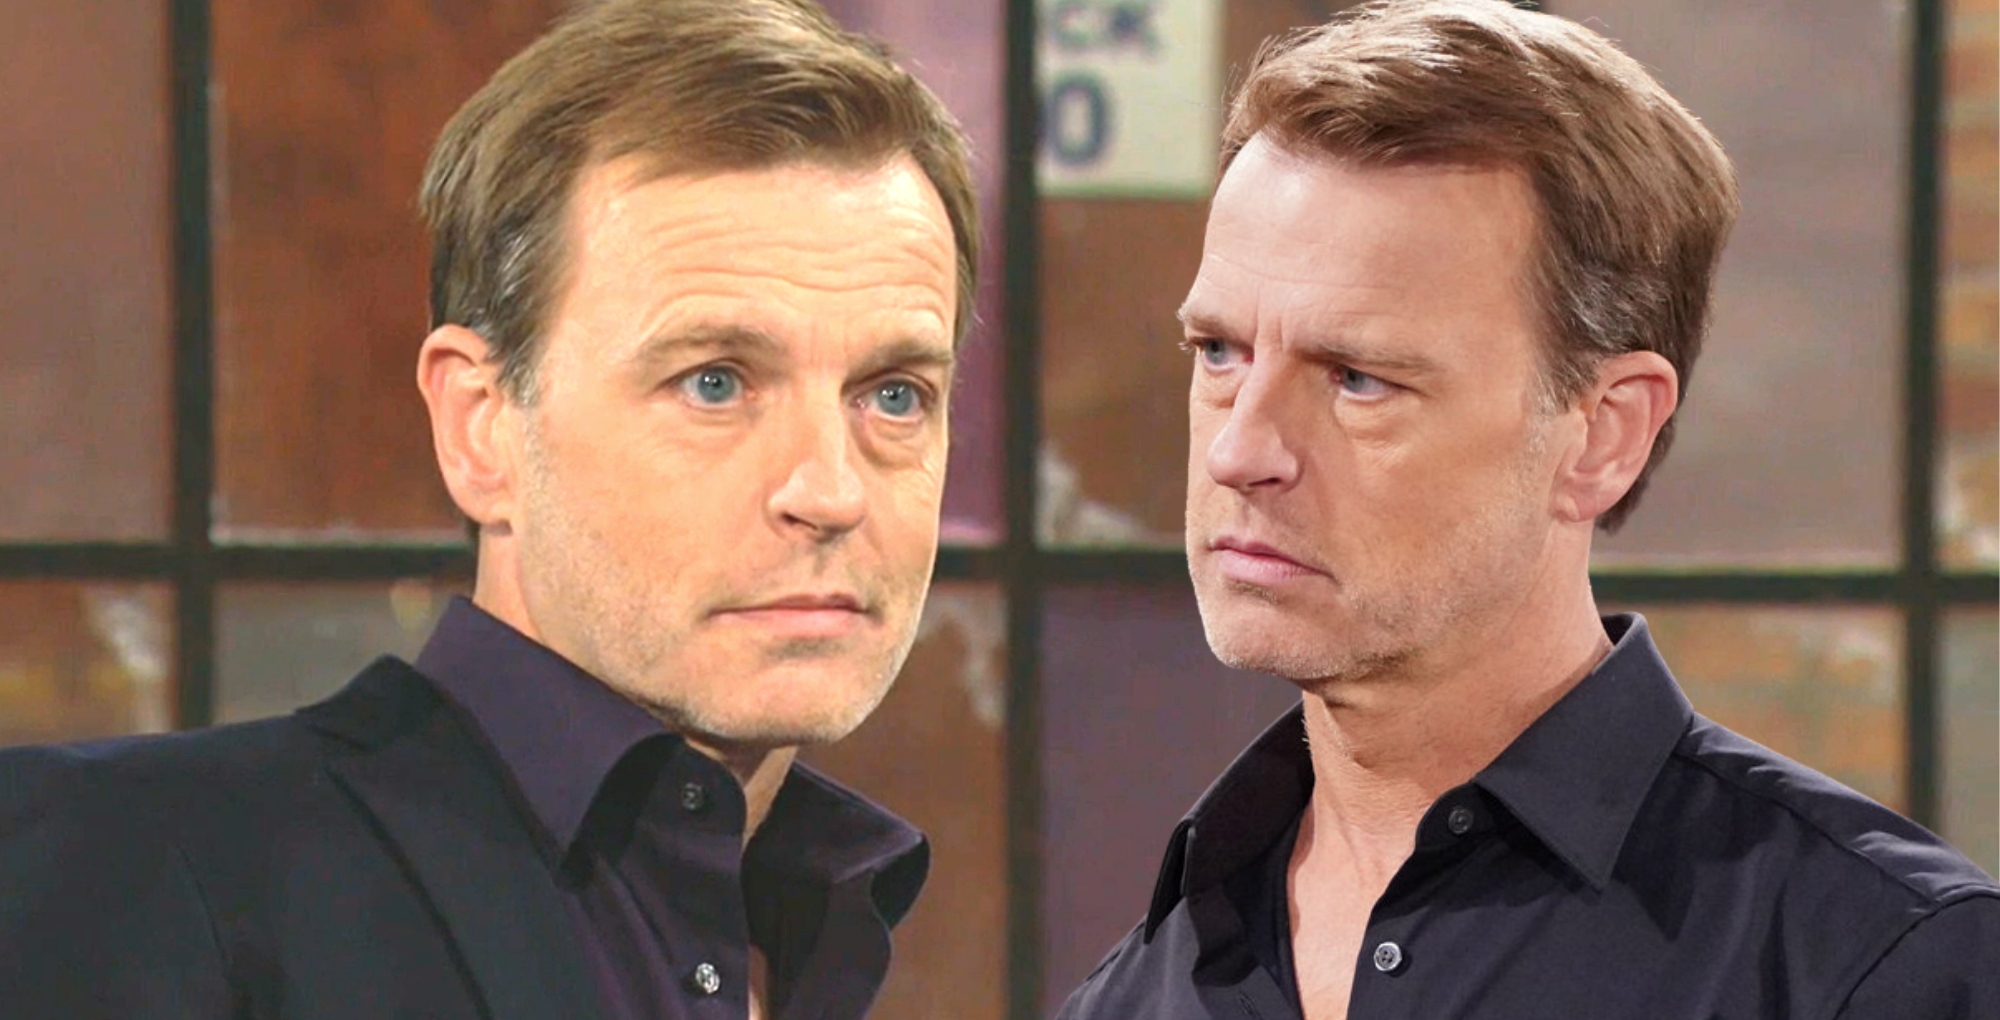 tucker mccall on young and the restless two images of him smirking and annoyed